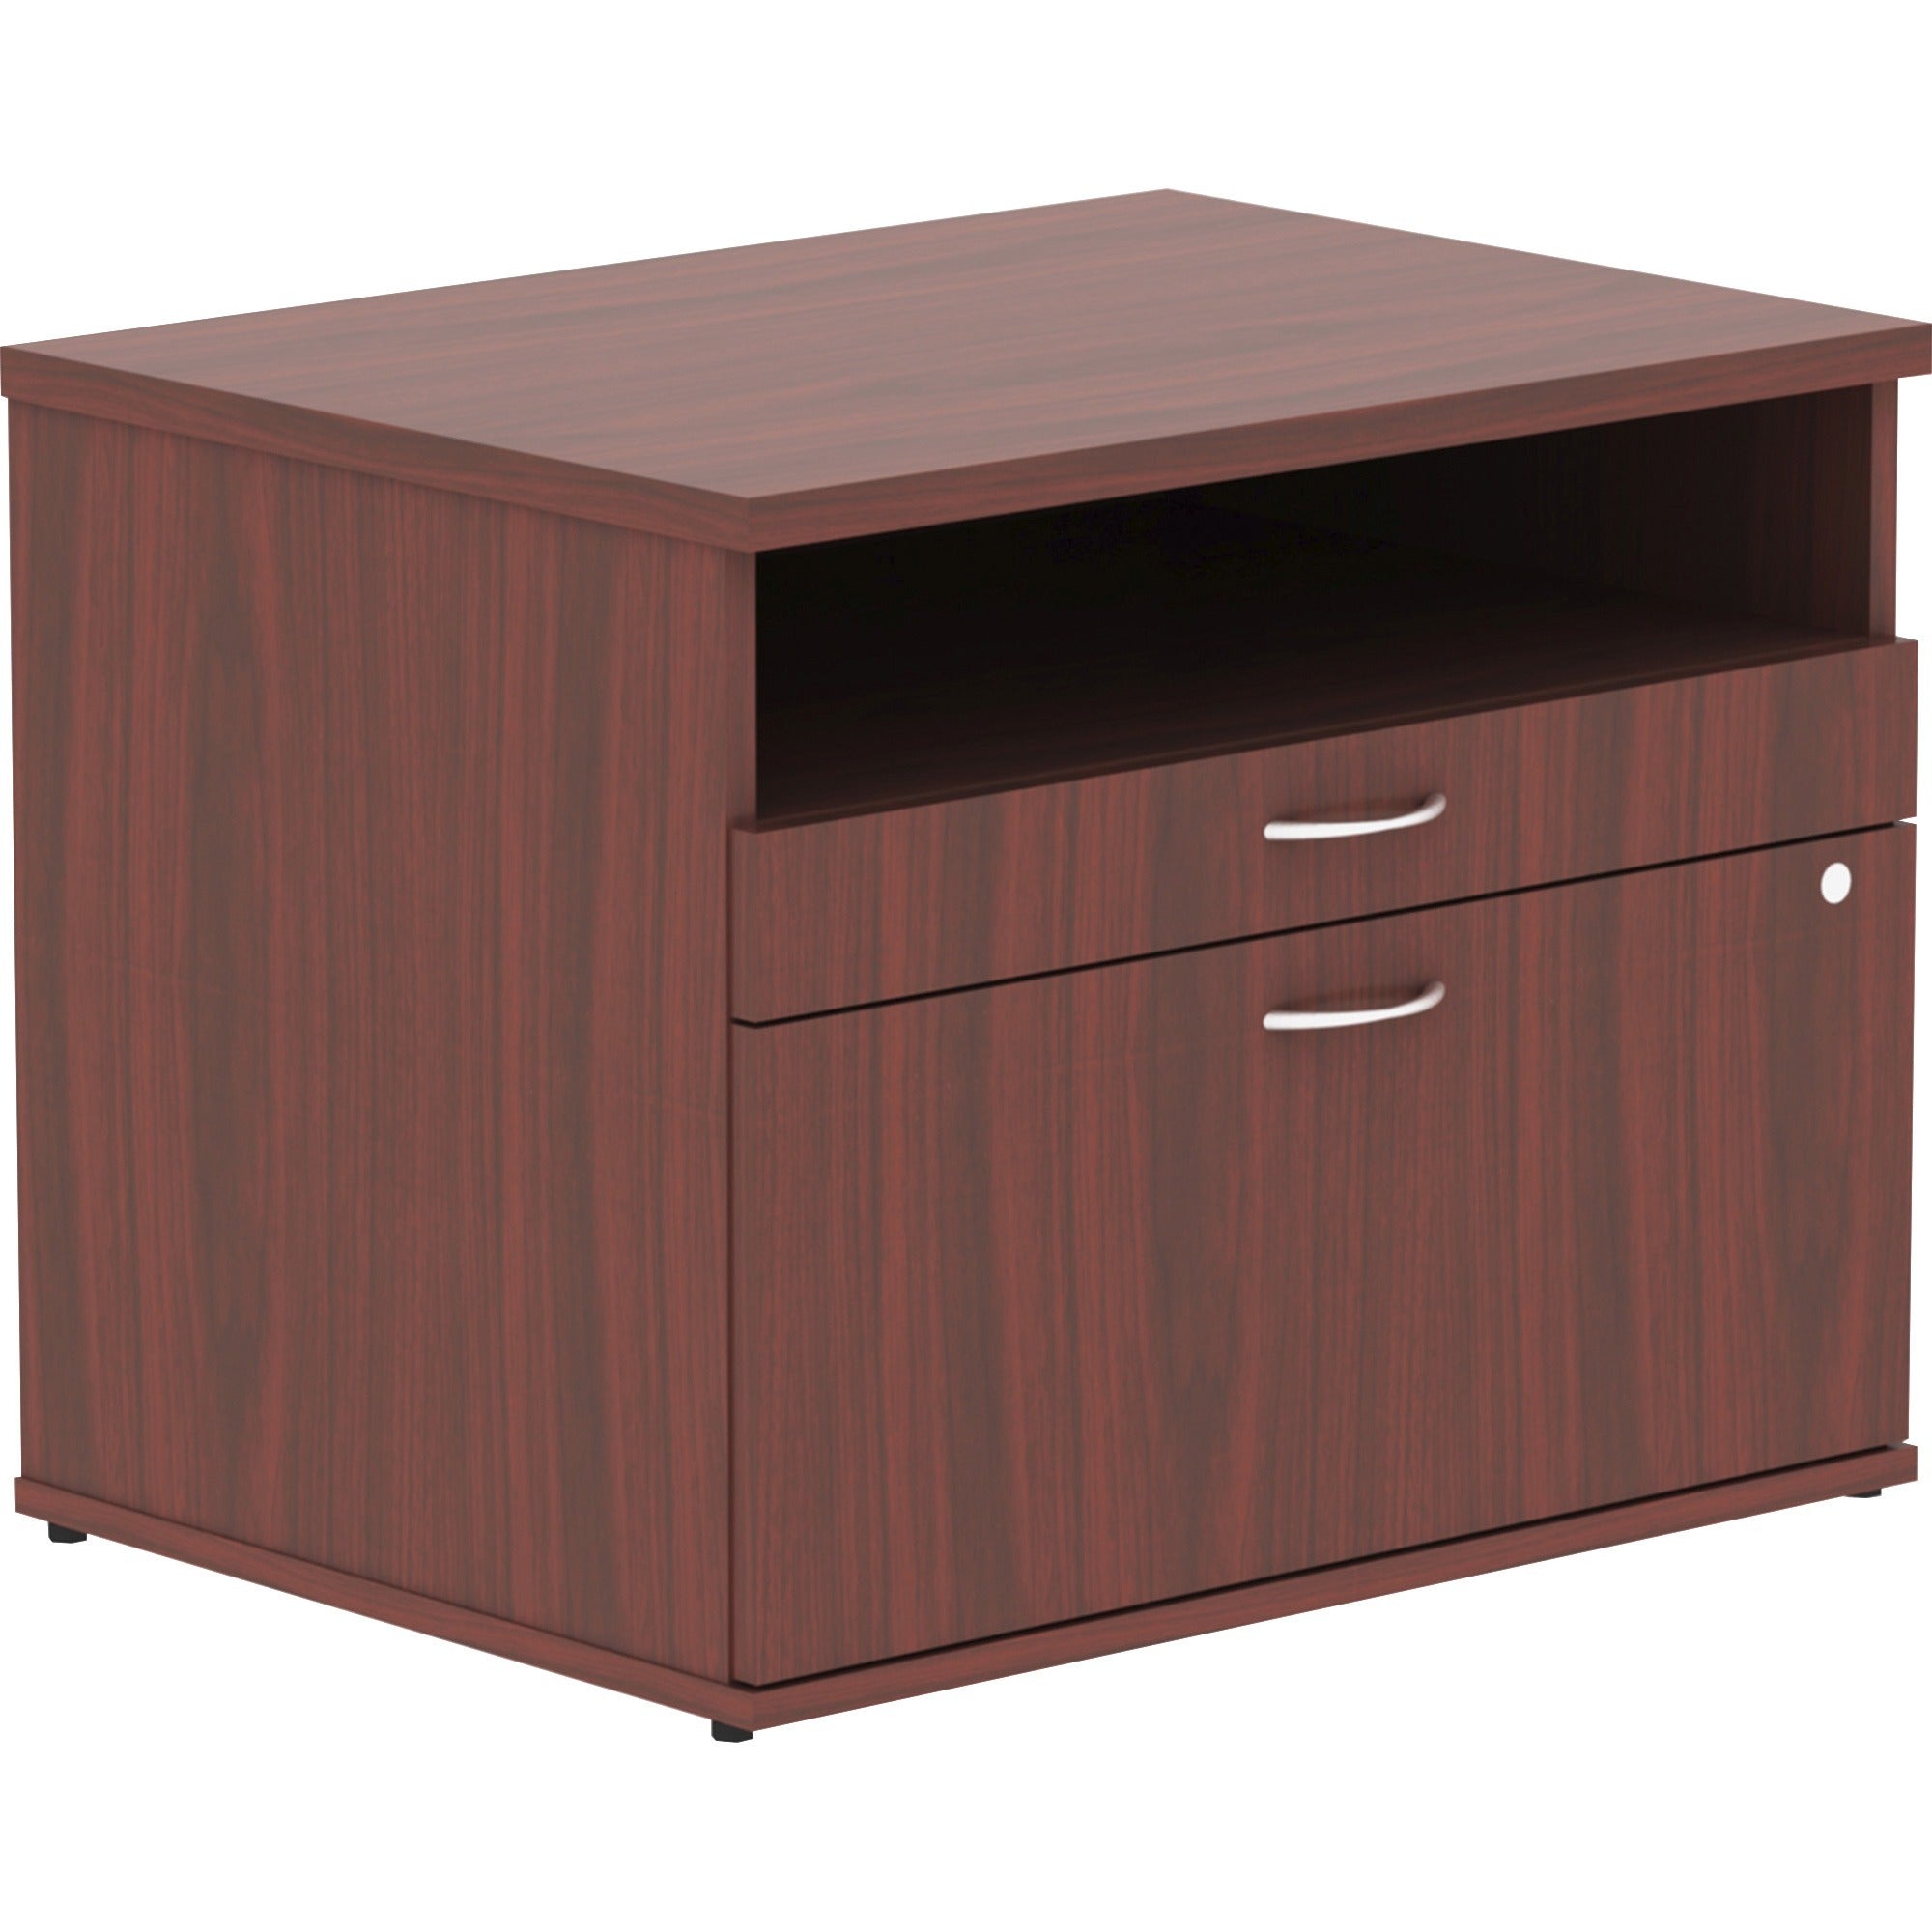 lorell-relevance-series-2-drawer-file-cabinet-credenza-w-open-shelf-295-x-22231-2-x-file-drawers-1-shelves-finish-mahogany-laminate_llr16212 - 1